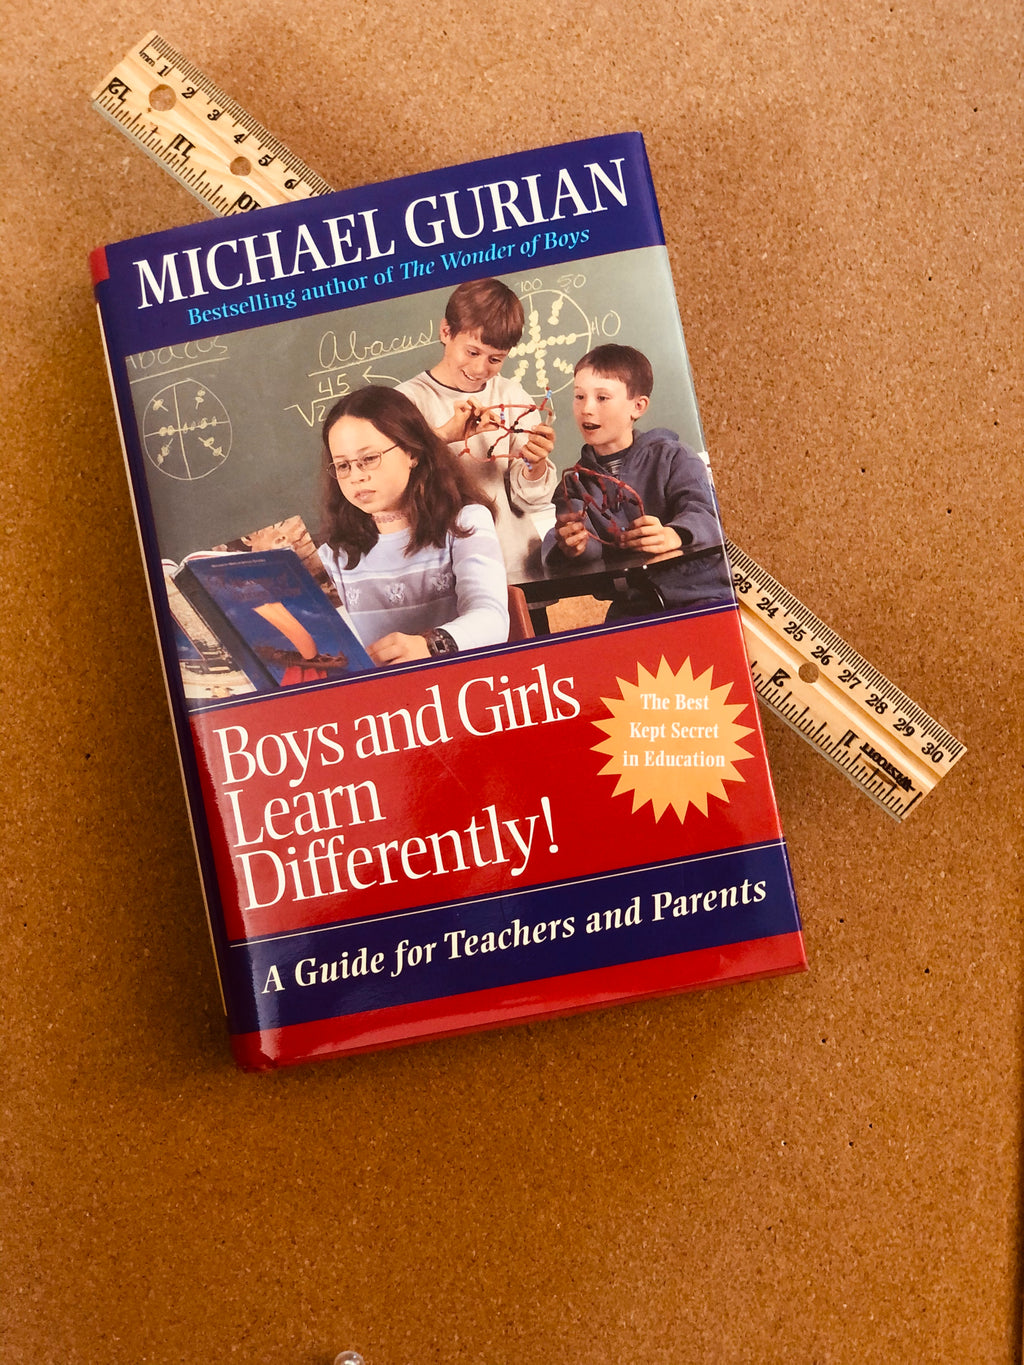 Boys and Girls Learn Differently- By Michael Gurian